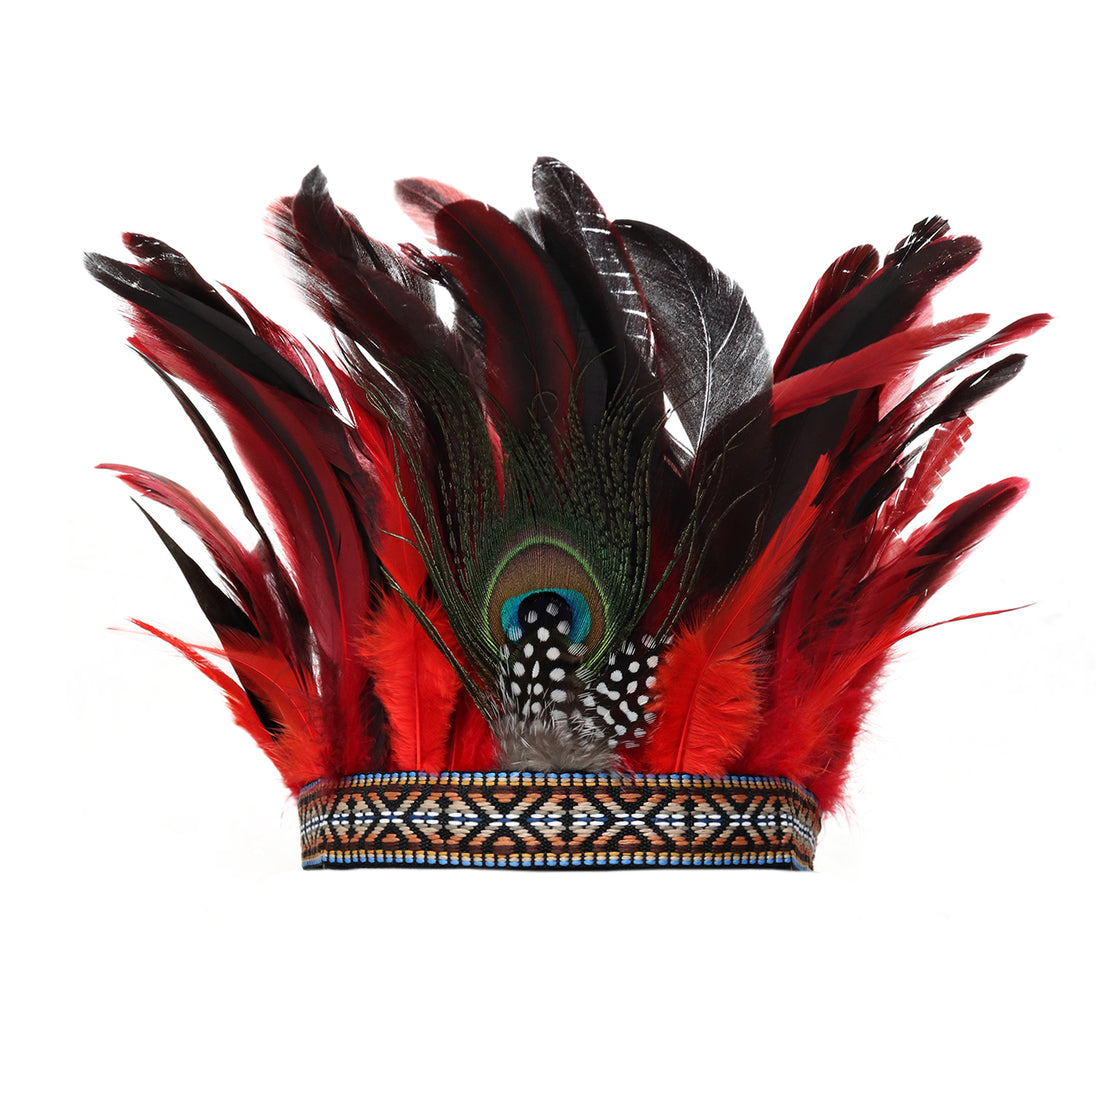 Peacock Feather Crown Carnival Headpiece Showgirl Headdress 1920s Flapper Accessories